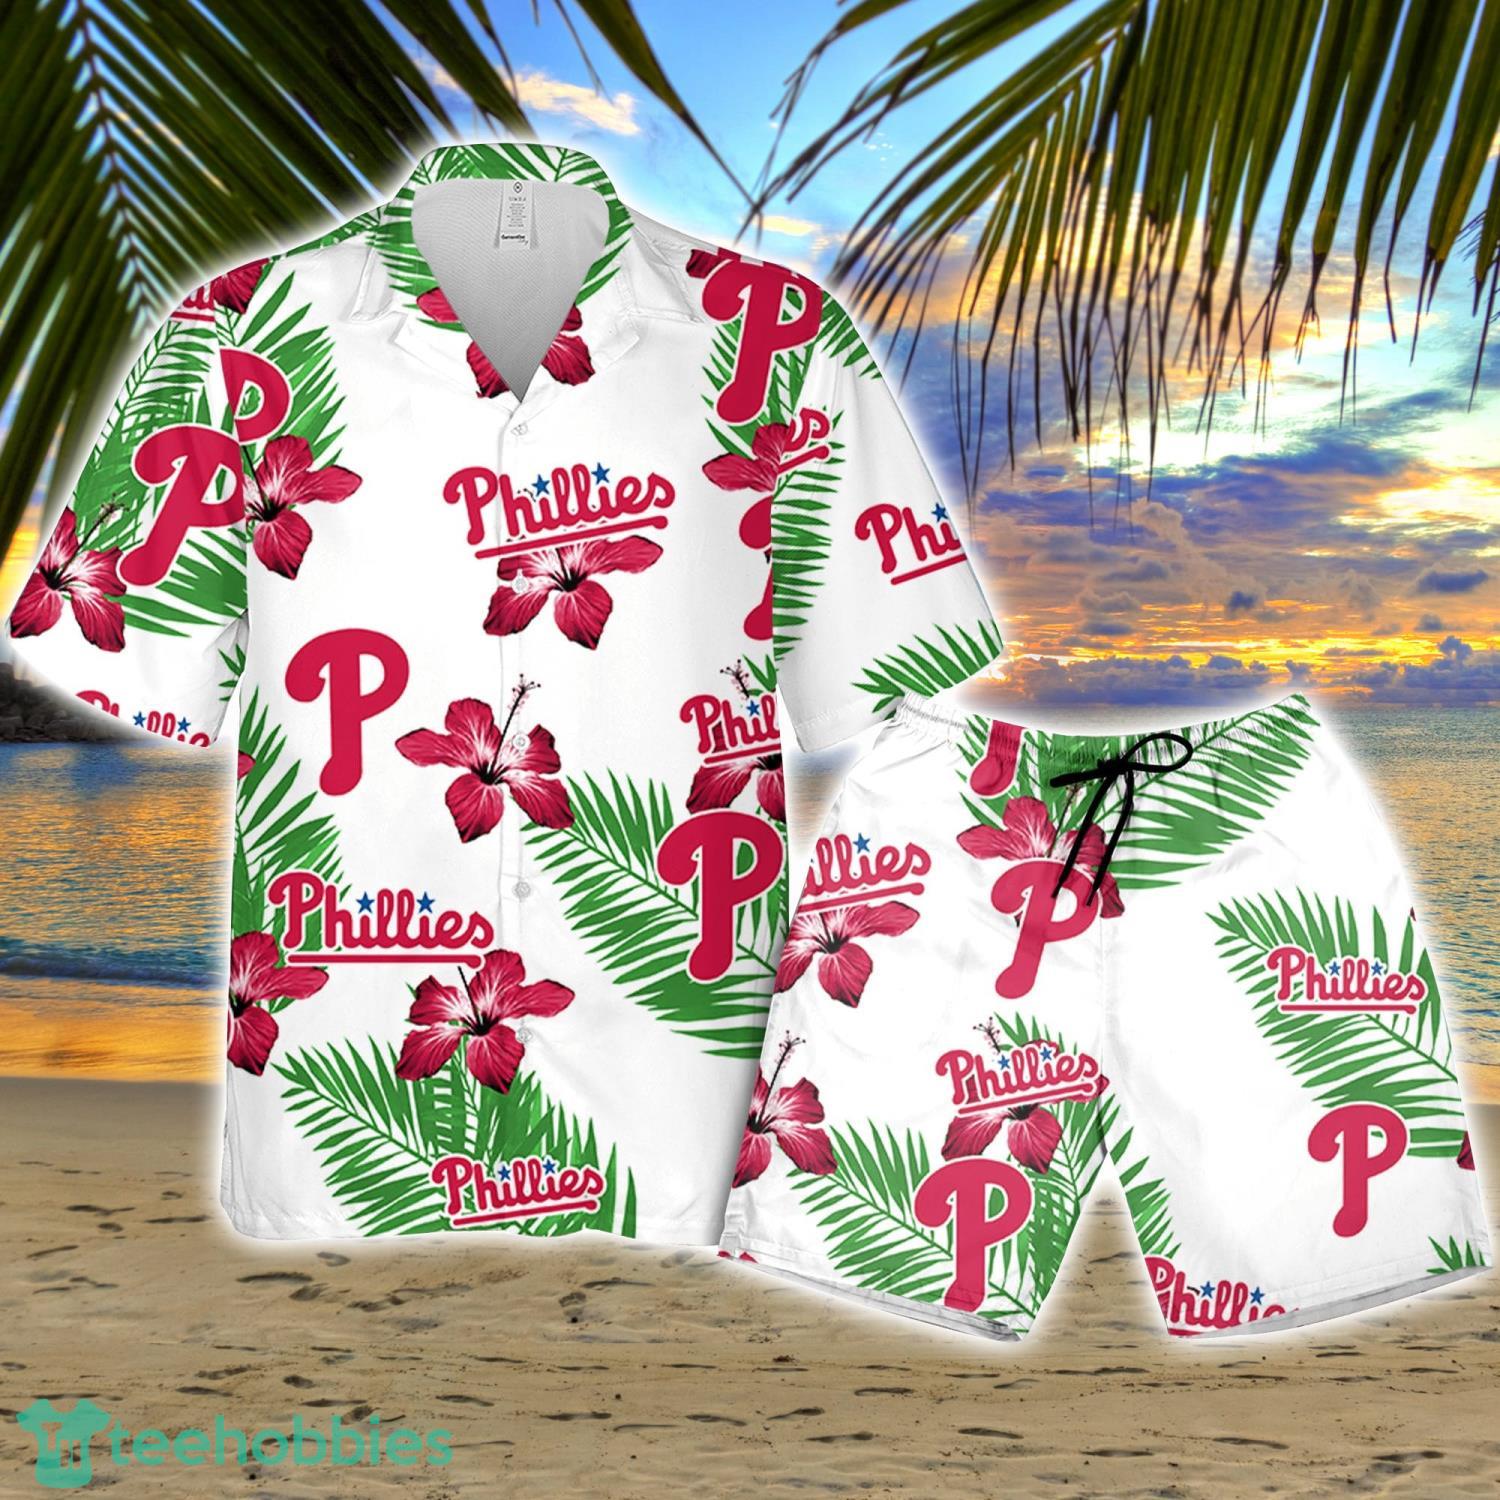 Chicago White Sox Logo And Green Leaf Pattern All Over Print Hawaiian Shirt  For Fans - Freedomdesign